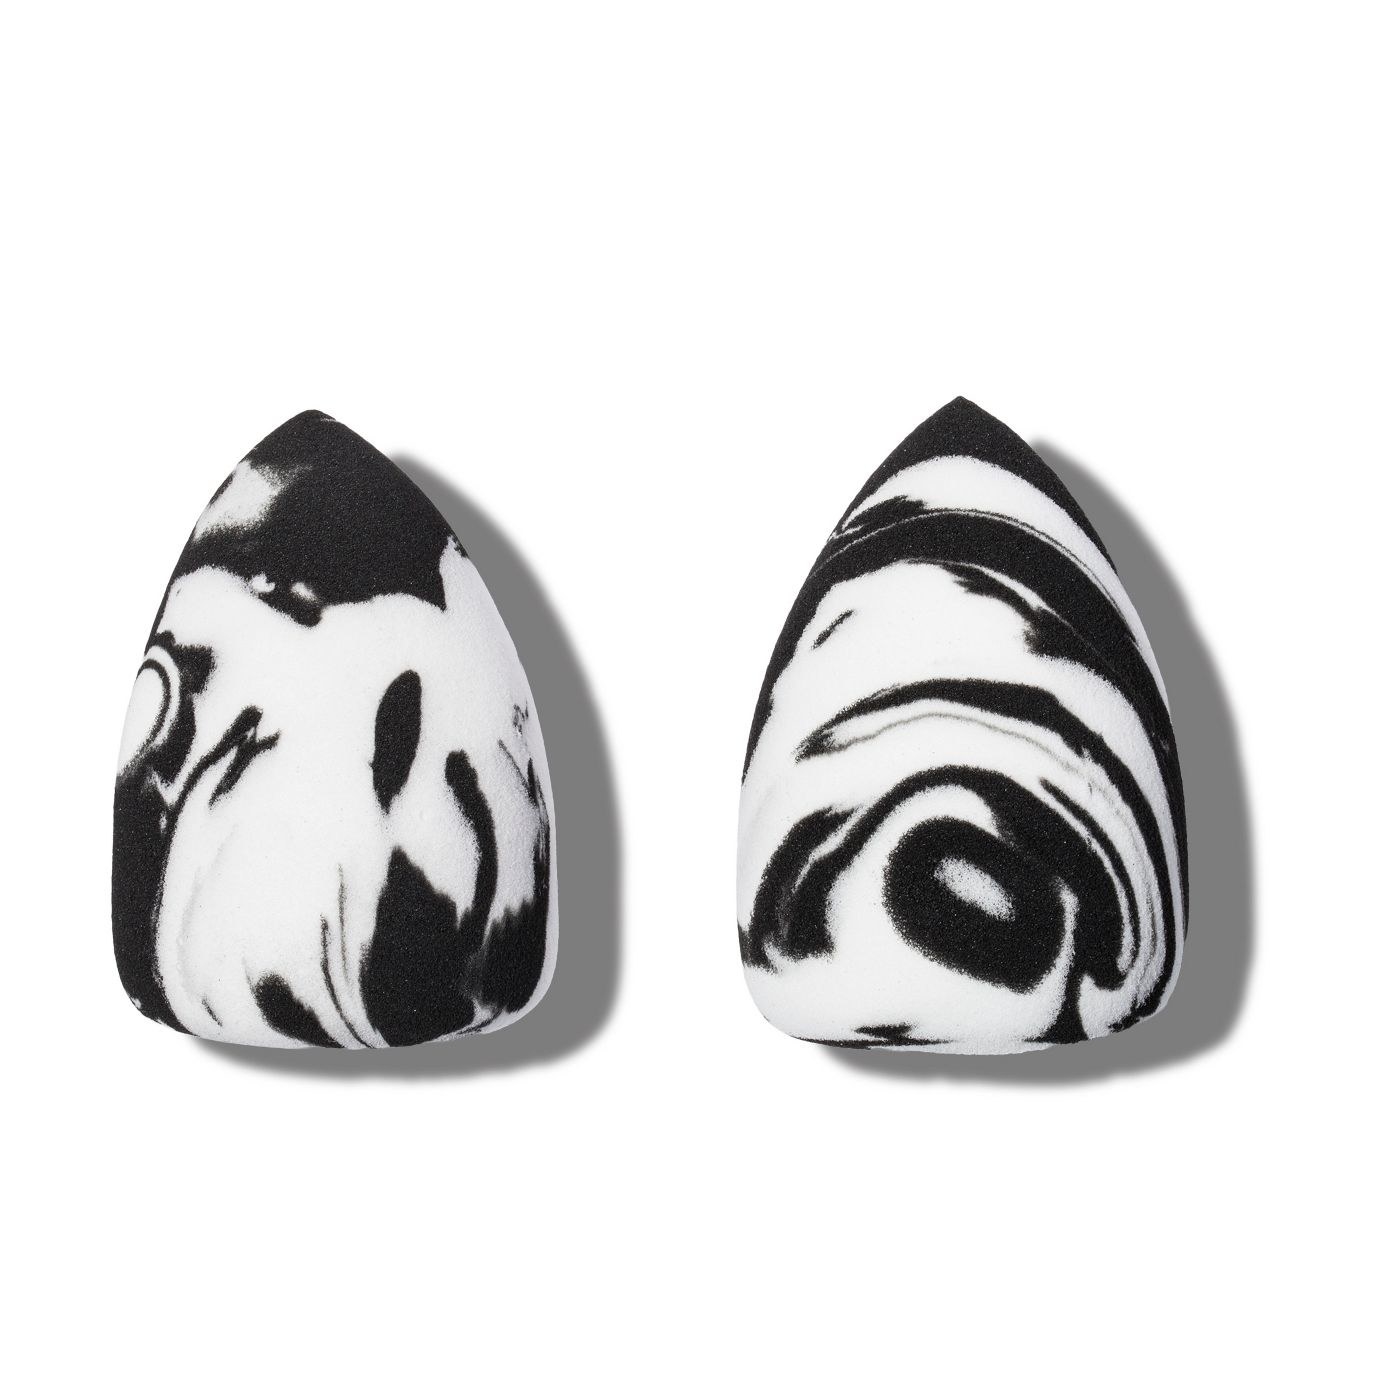 Two black and white marble printed makeup sponges